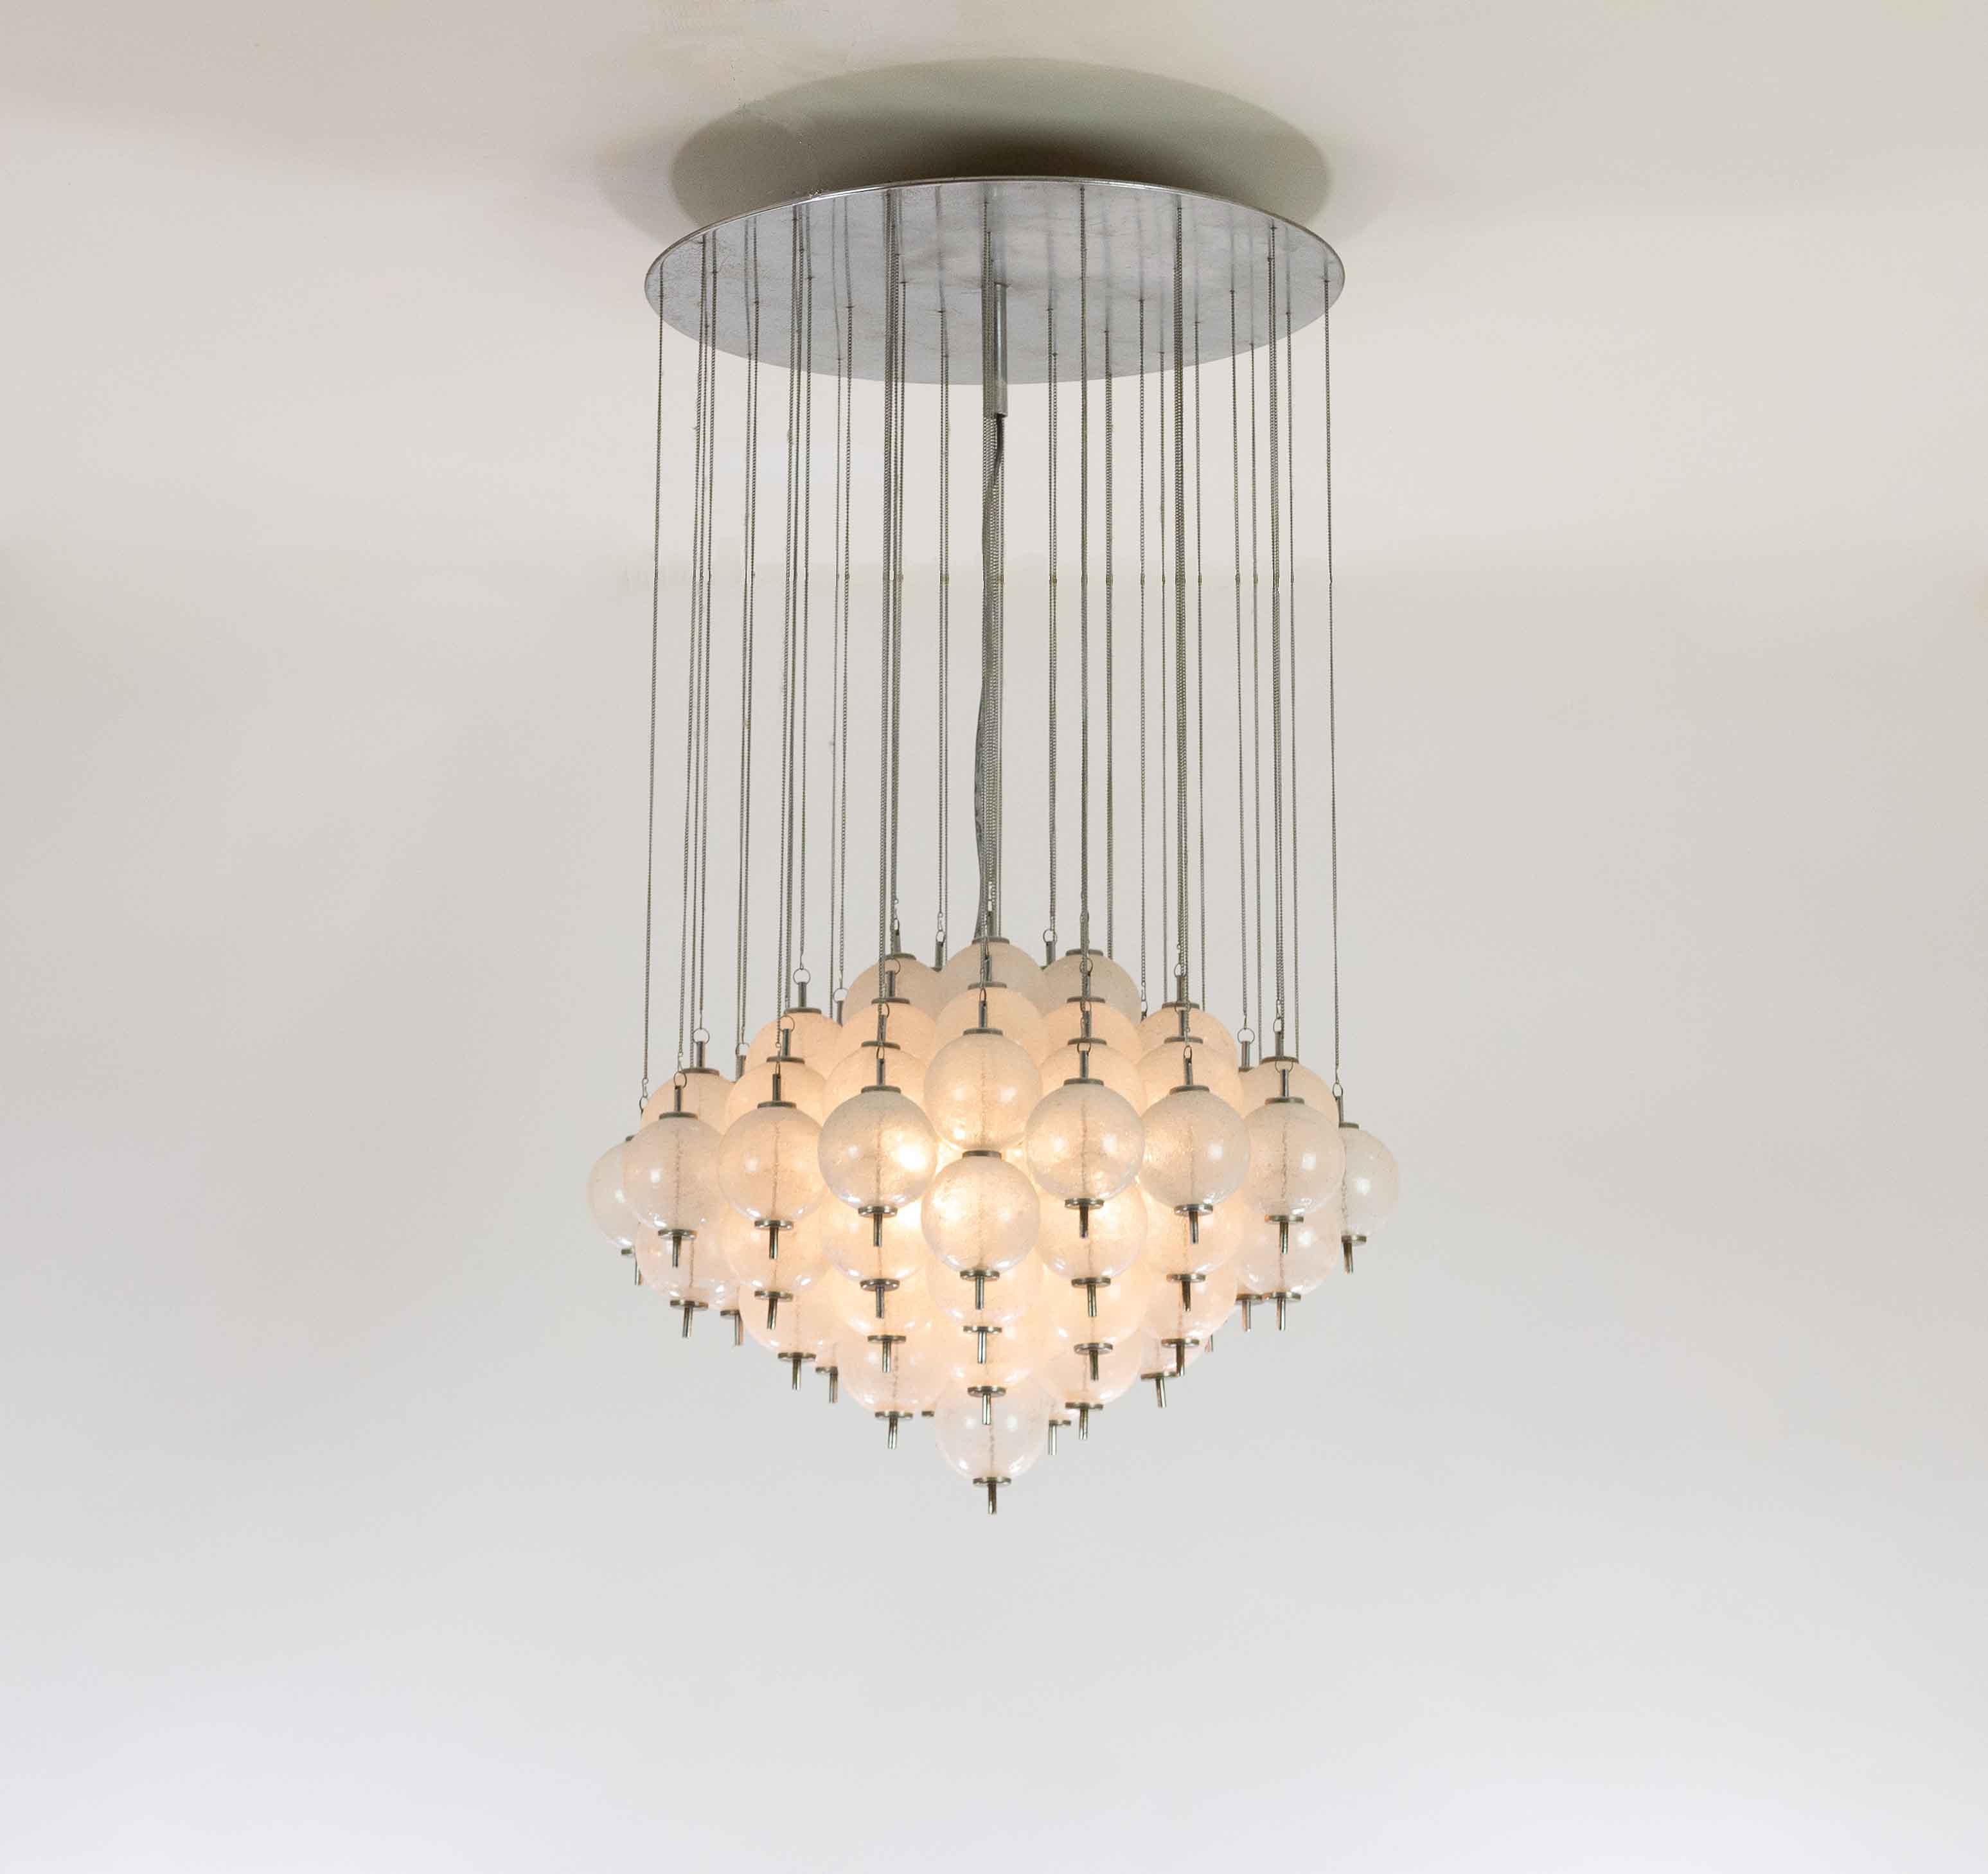 Impressive chandelier with 76 Murano glass elements from the 1960s.

The ingenious structure consists of cascading pieces of hand-blown Murano glass hanging from subtle metal chains that are connected to a round metal ceiling plate.

The spheres